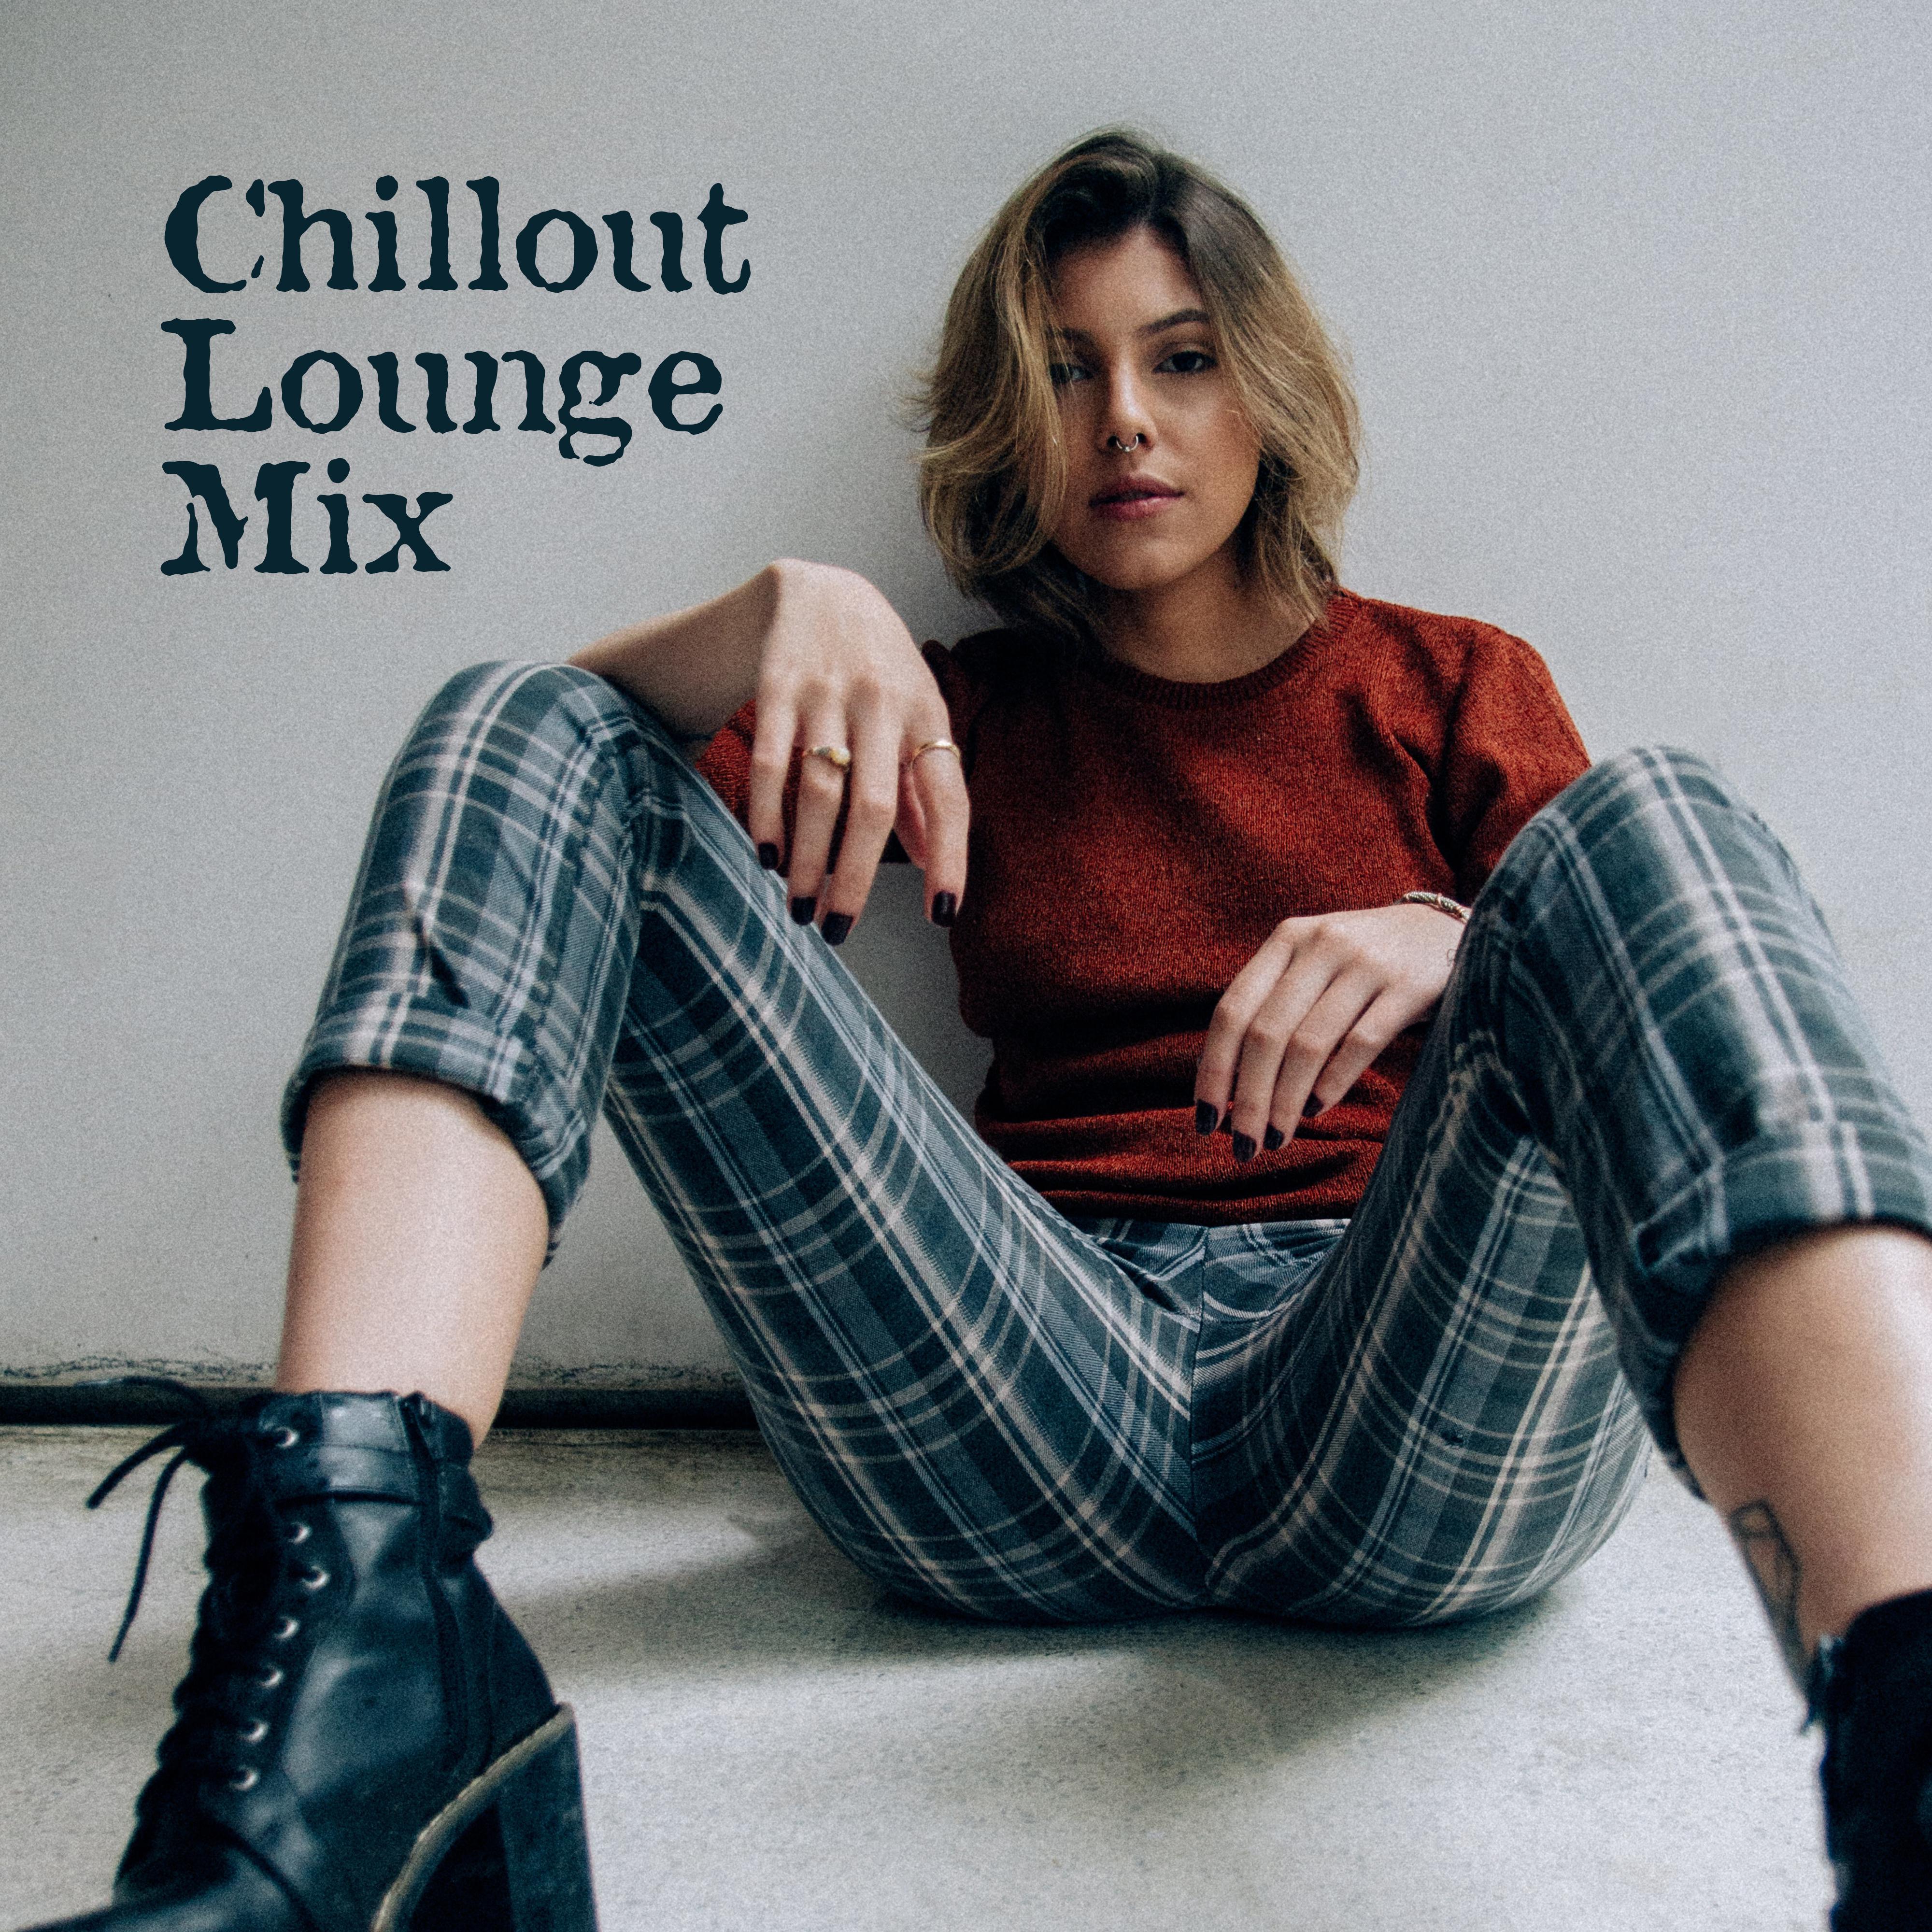 Chillout Lounge Mix – Soft Chill Out Music, Calming Vibes, Reduce Stress, Spring Chill 2019, Chillout Bar Relax